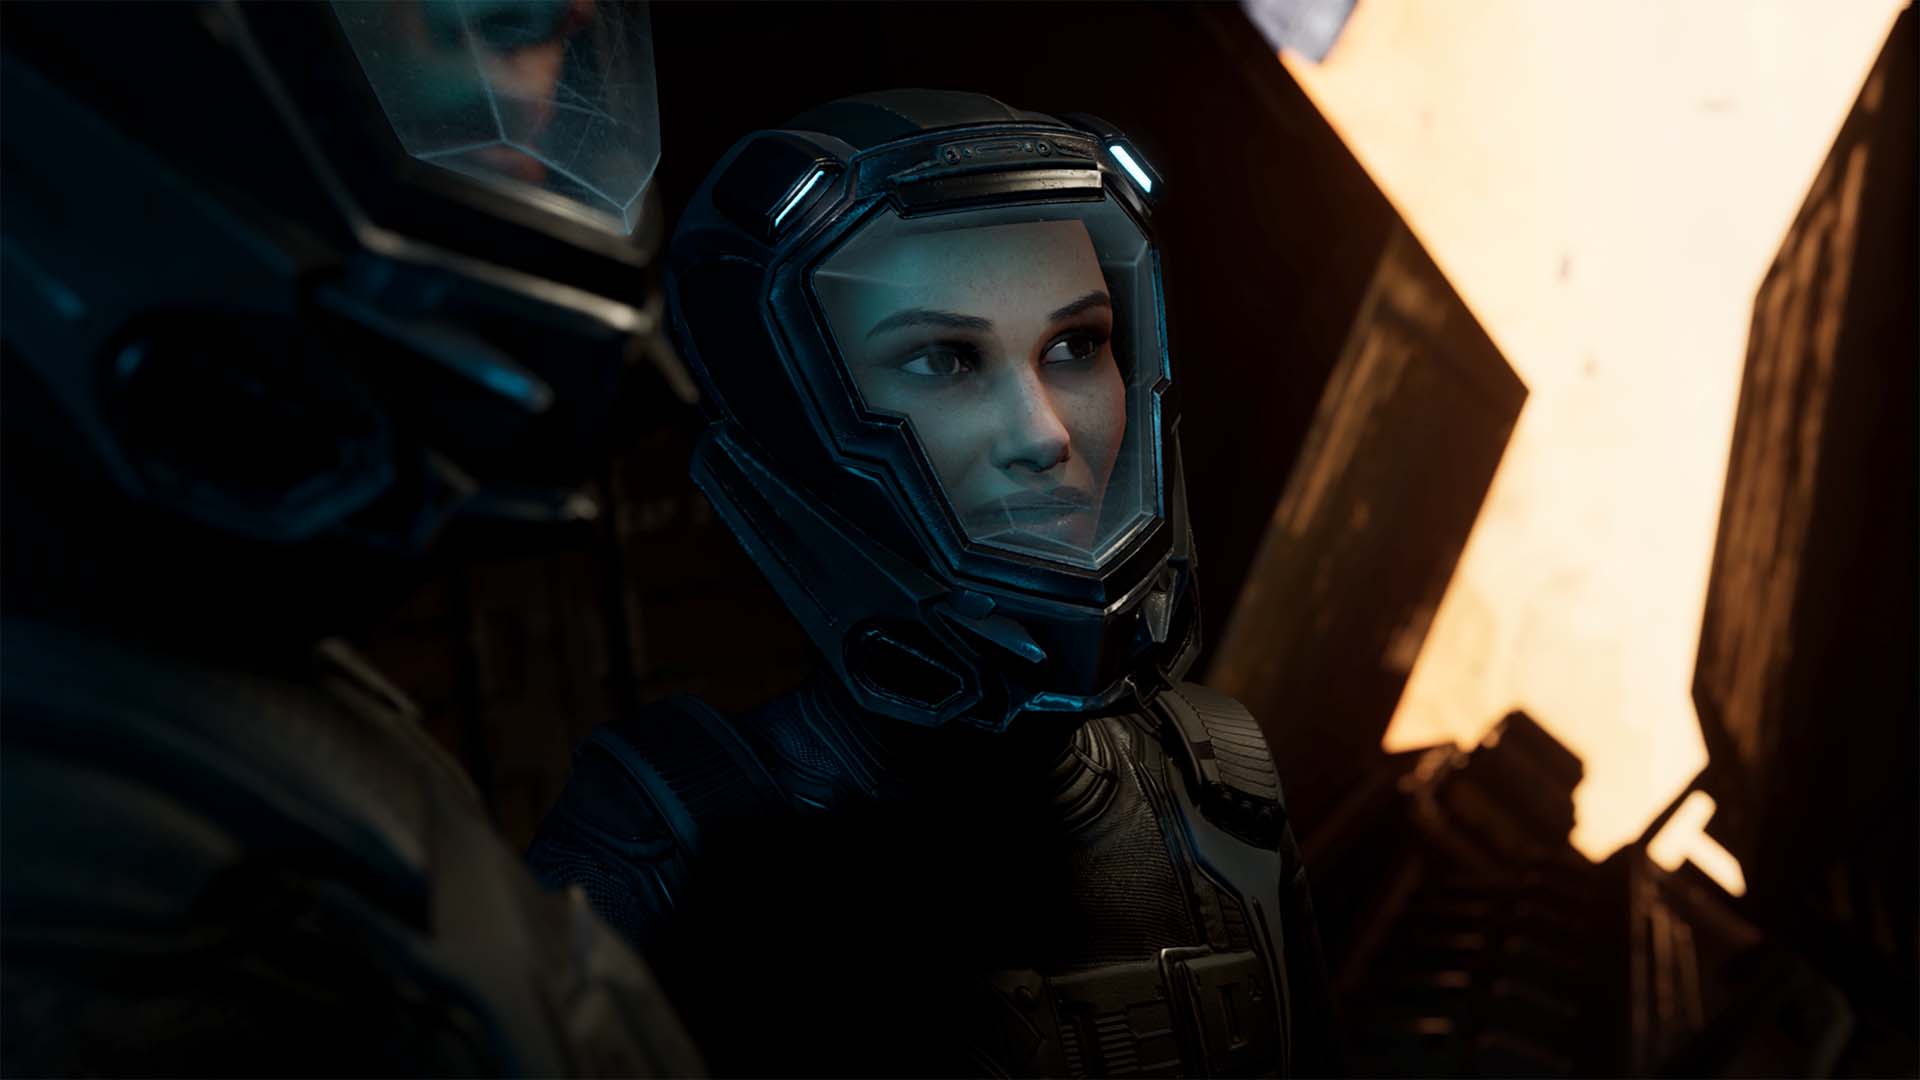 The Expanse: A Telltale Series Begins July 27th